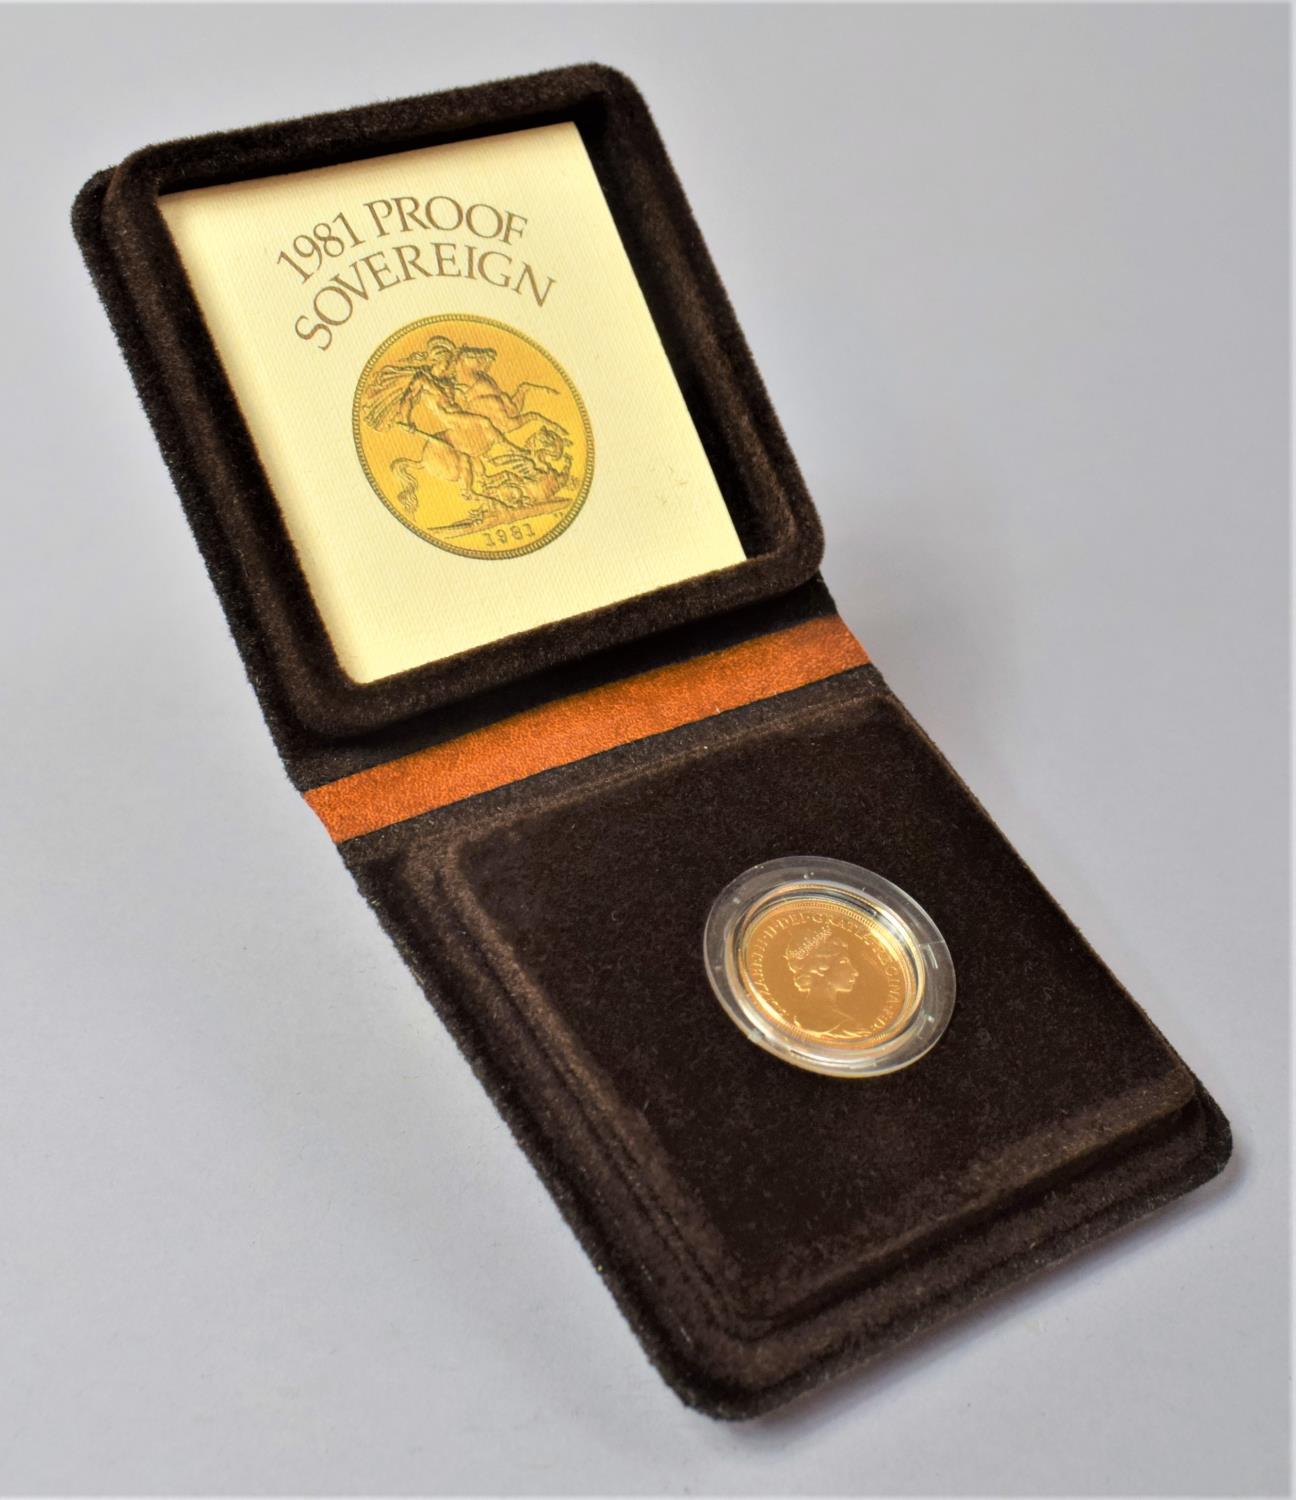 A 1981 Proof Sovereign in Royal Mint Presentation Case - Image 2 of 3